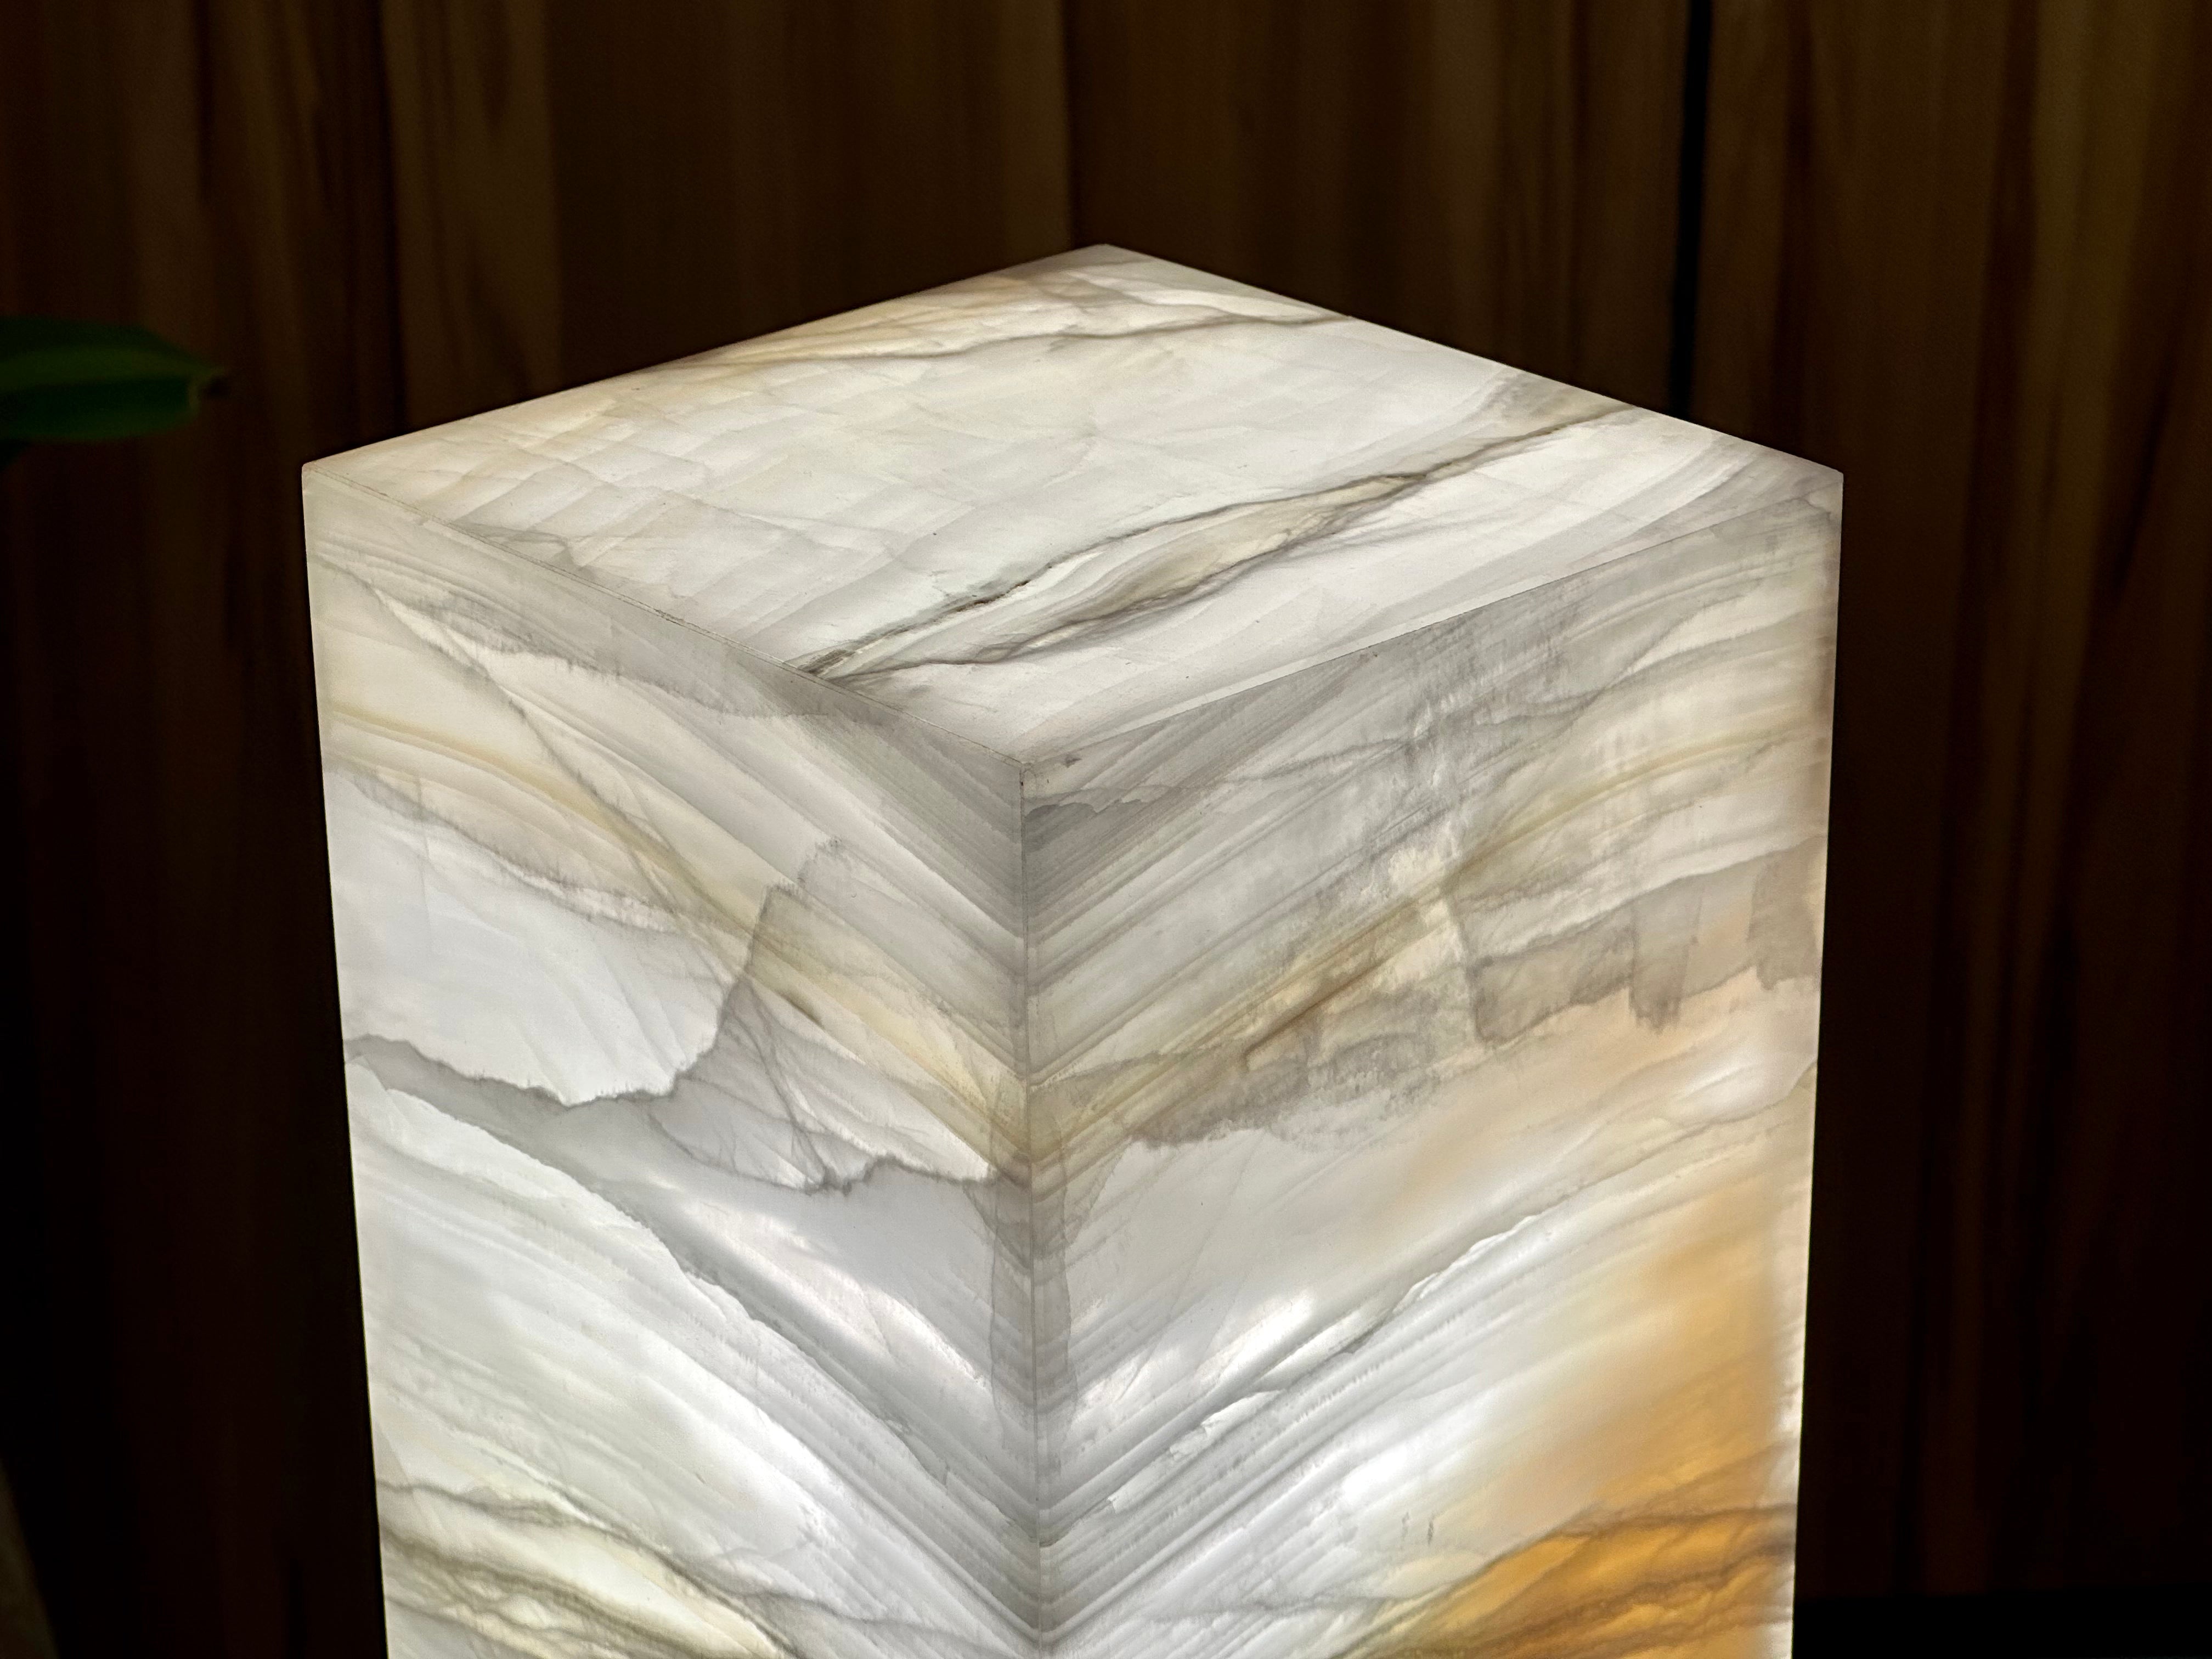 Artisanal Onyx Stone Table Lamp - This elegant Stone Table Lamp adds a touch of luxury to any space - Natural Onyx